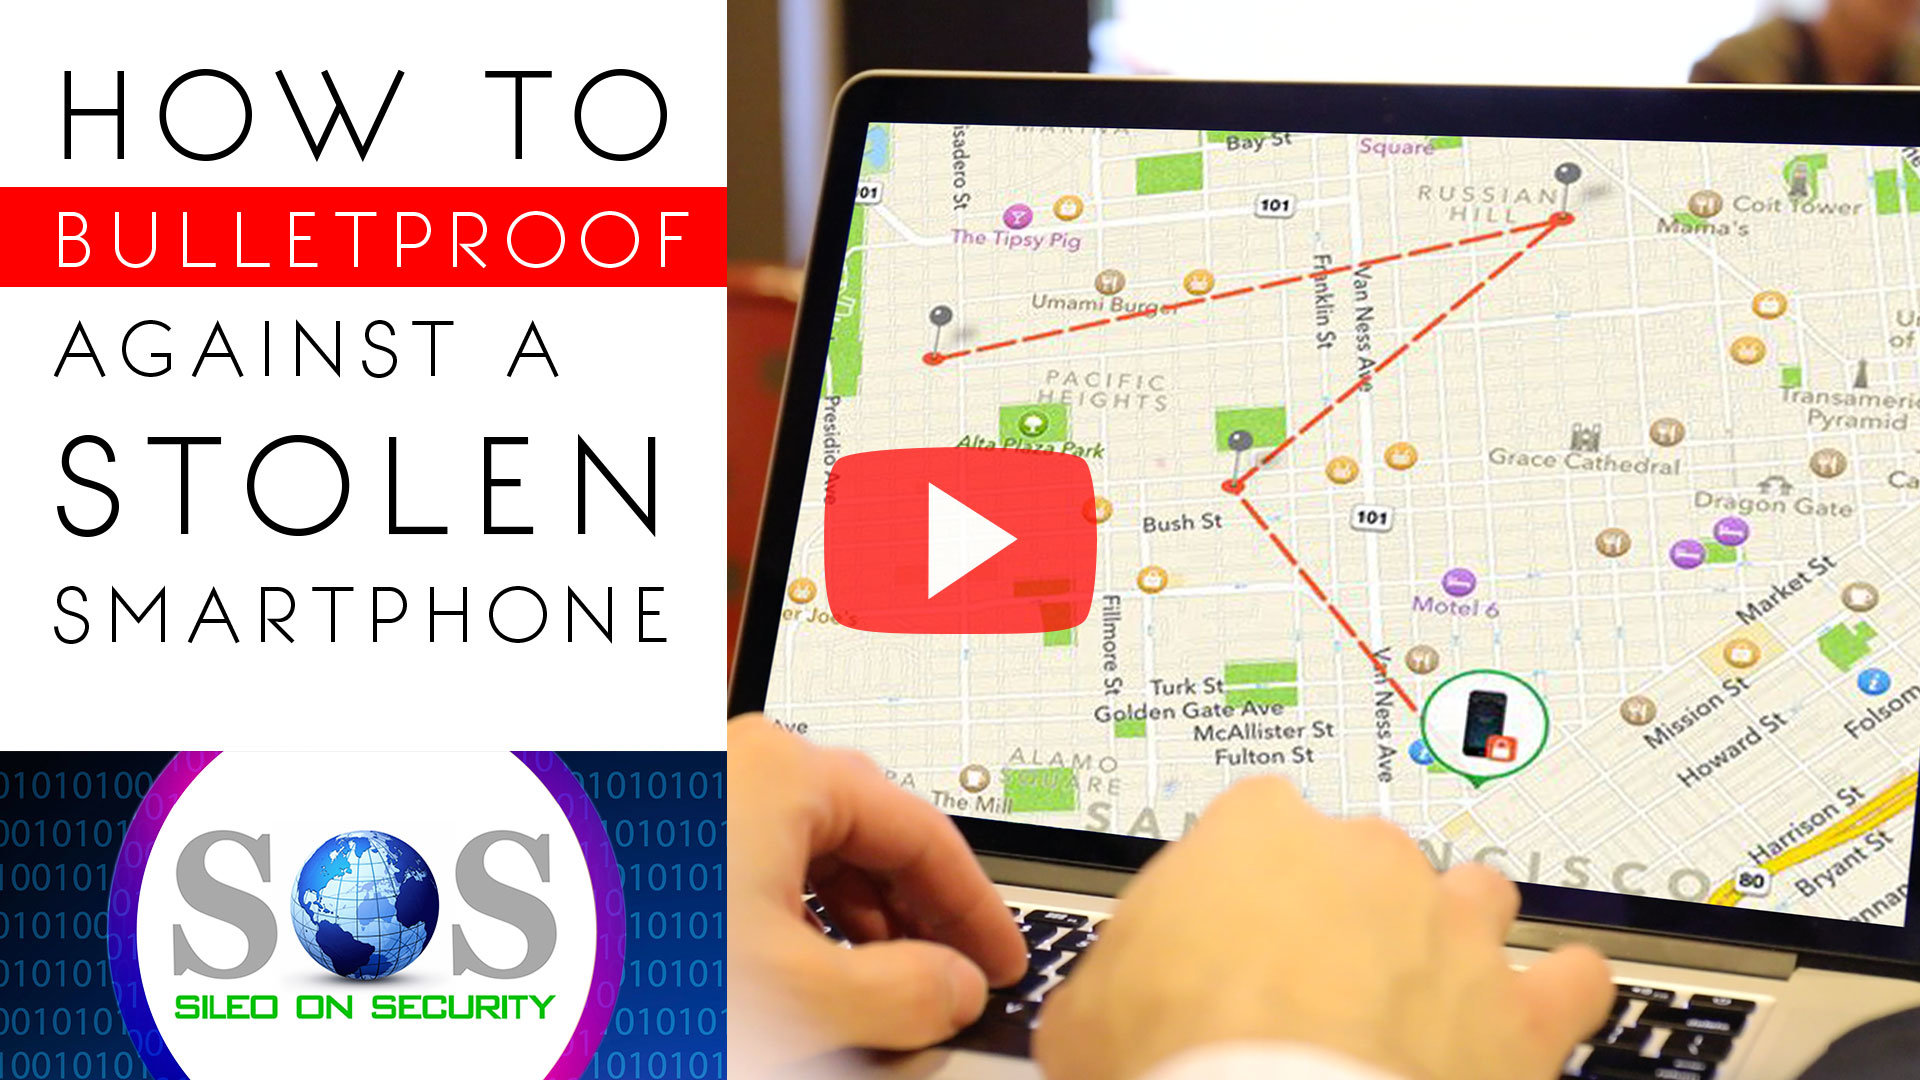 How to Bulletproof Against a Stolen Smartphone